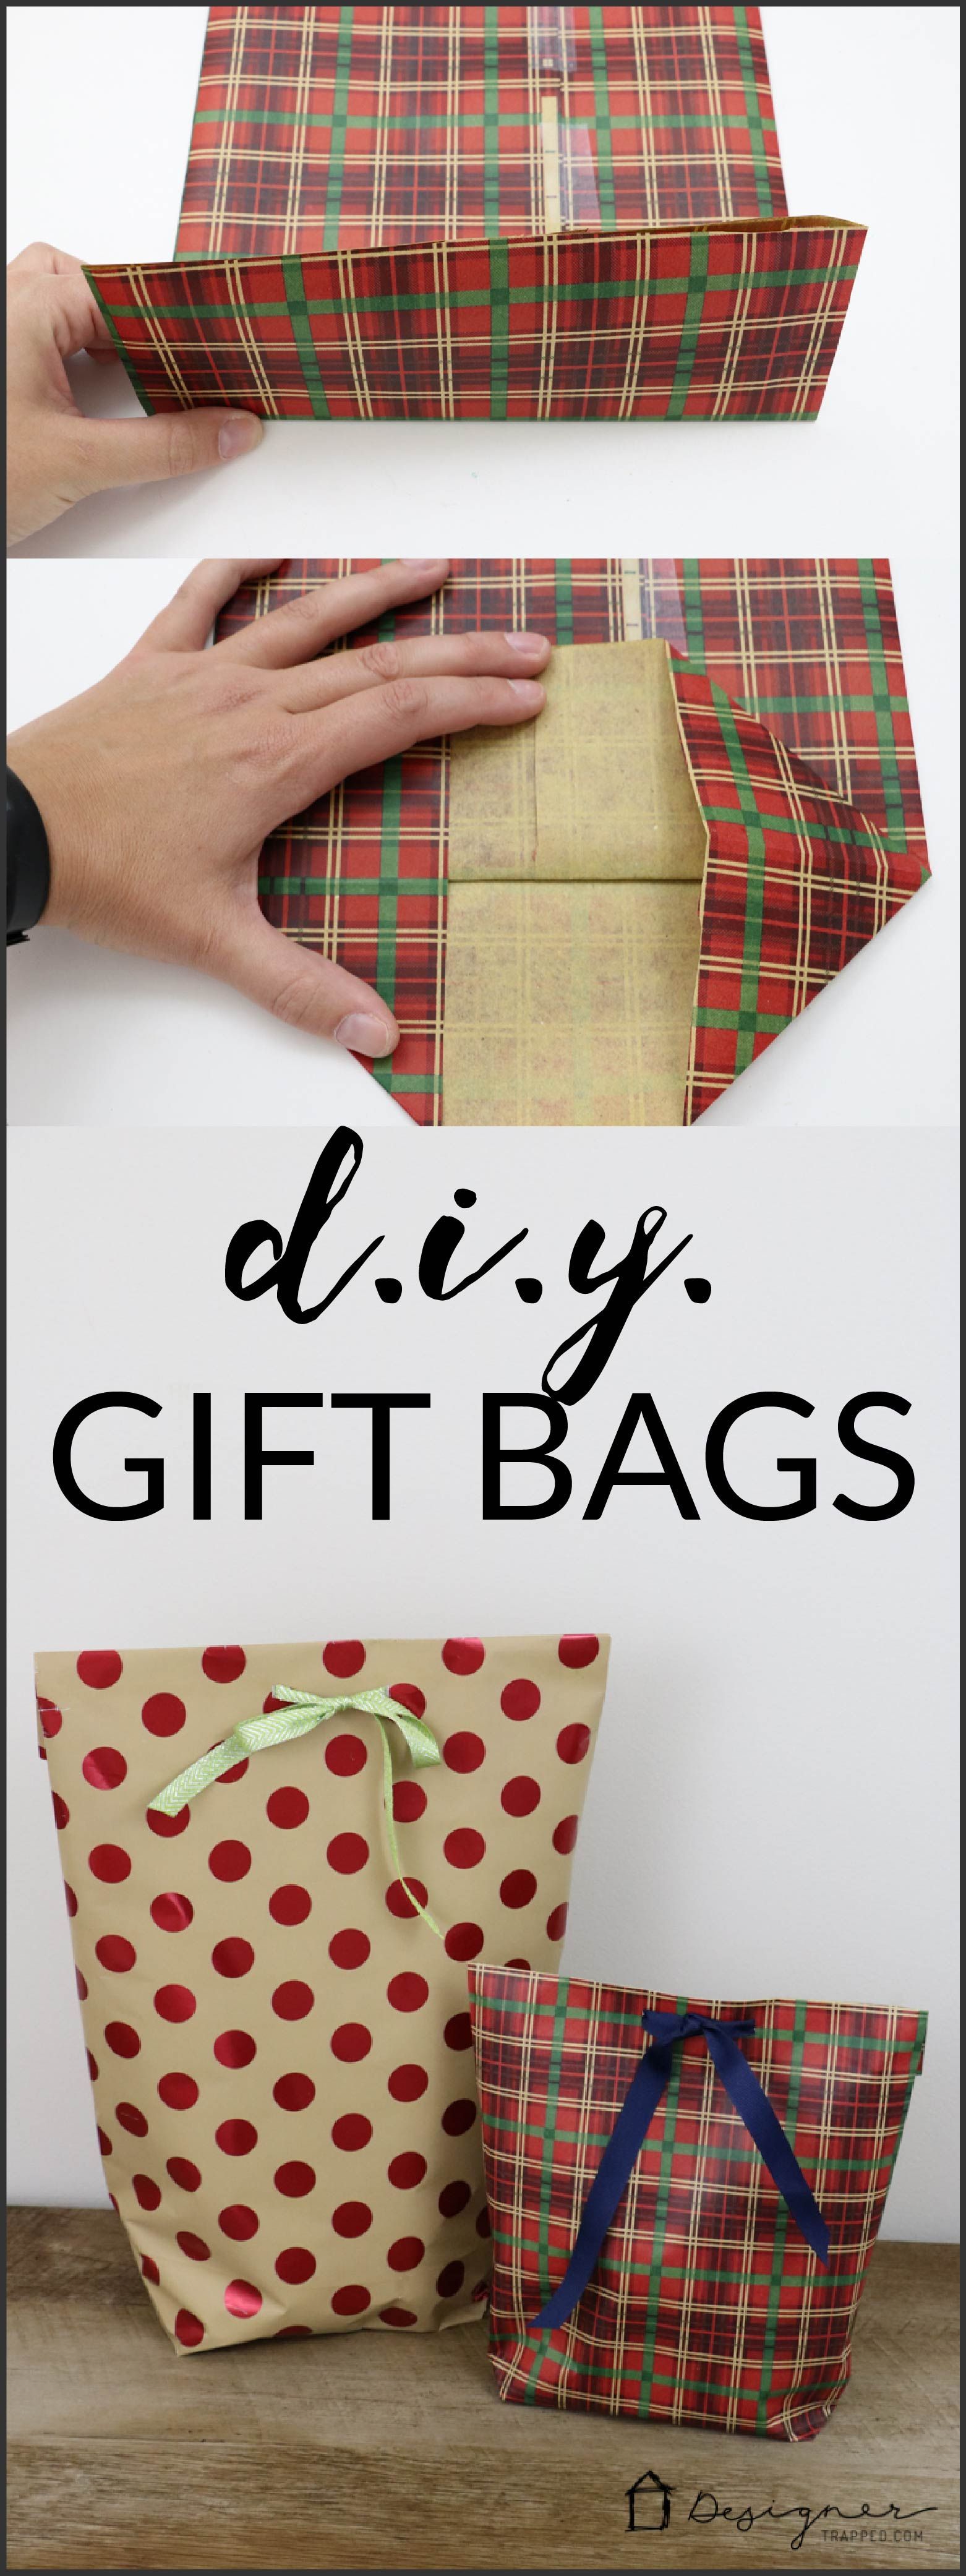 A MUST PIN FOR THE HOLIDAYS! Learn how to make a DIY gift bag from wrapping paper. Its the perfec